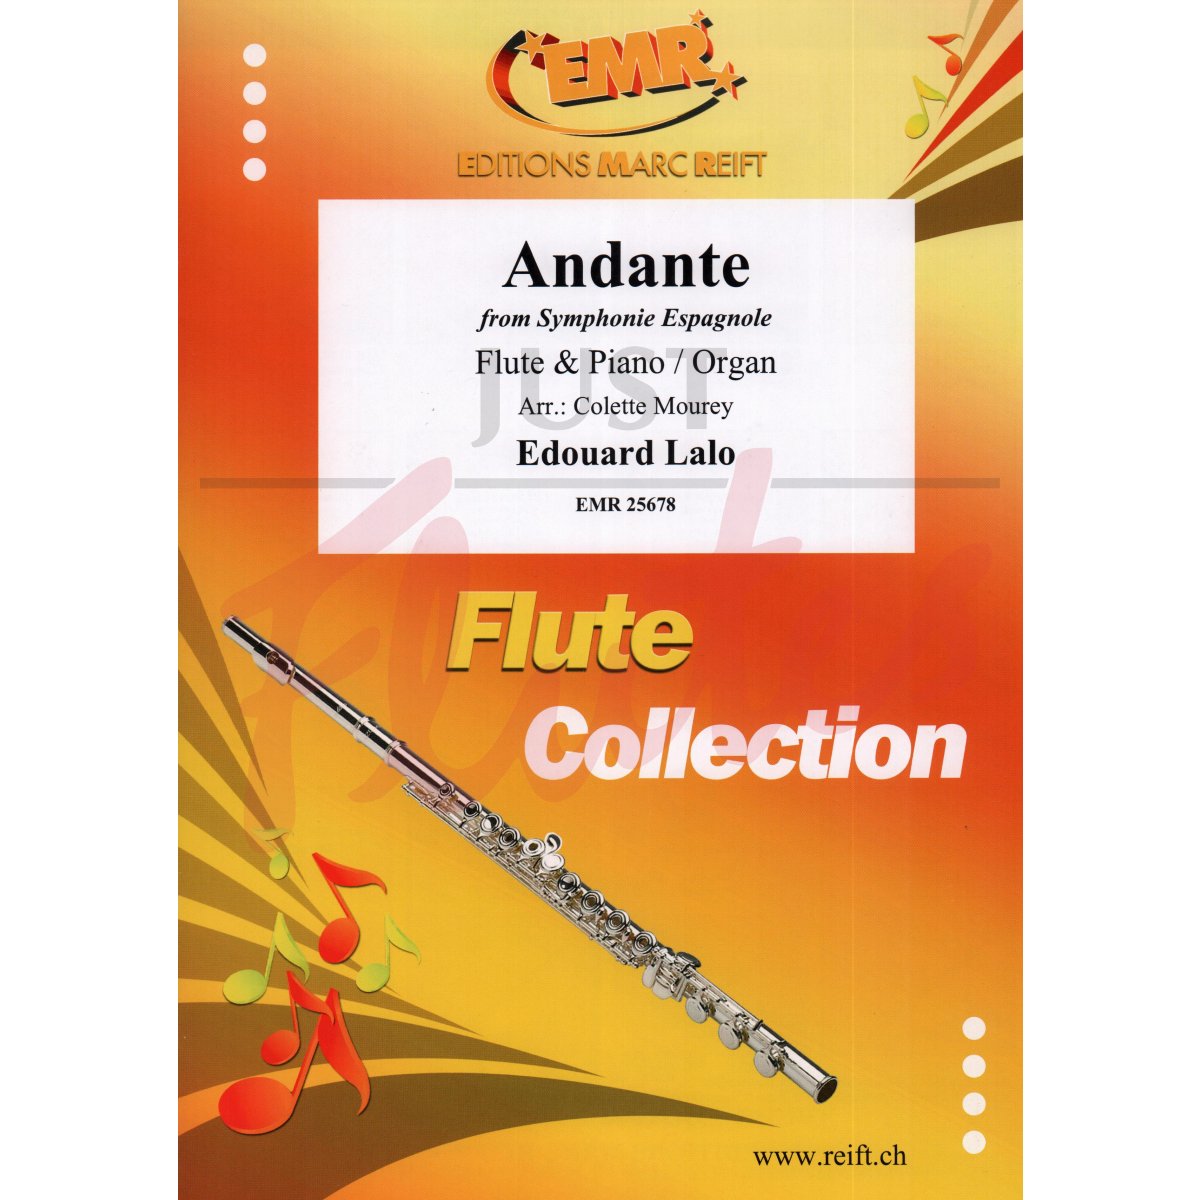 Andante from Symphonie Espagnole for Flute and Piano/Organ